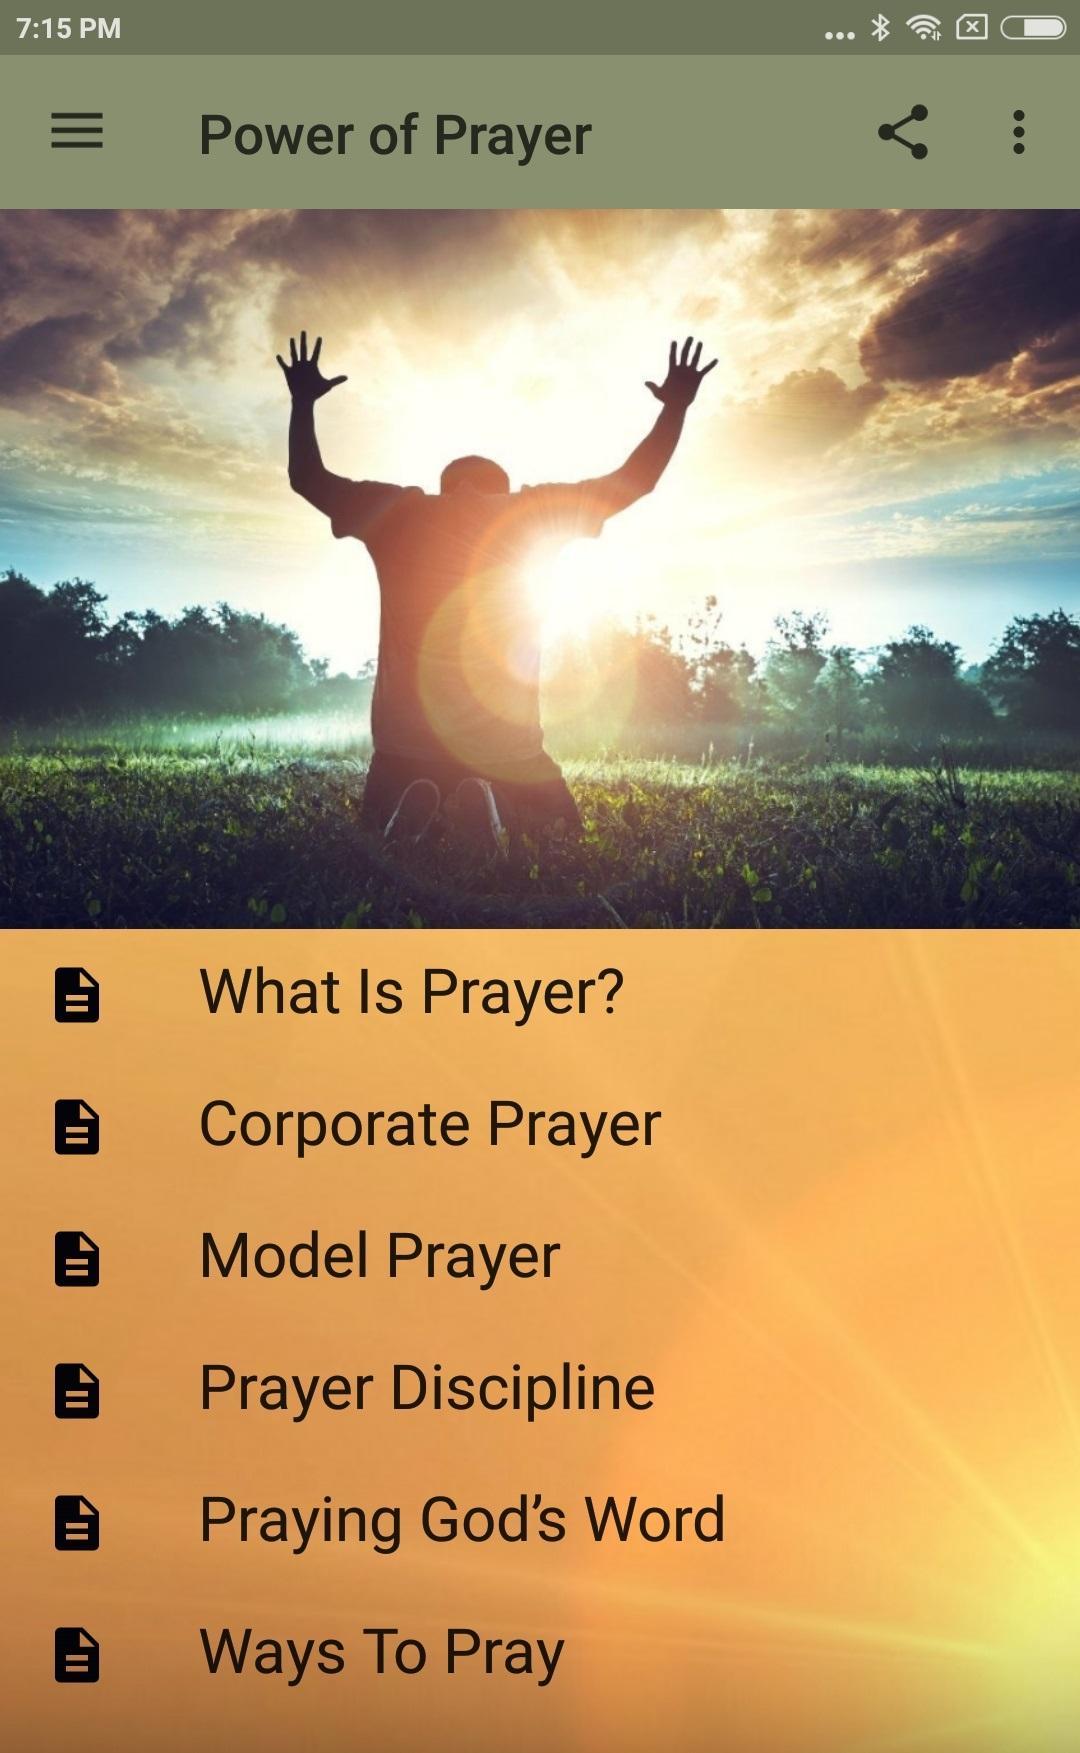 POWER OF PRAYER for Android - APK Download